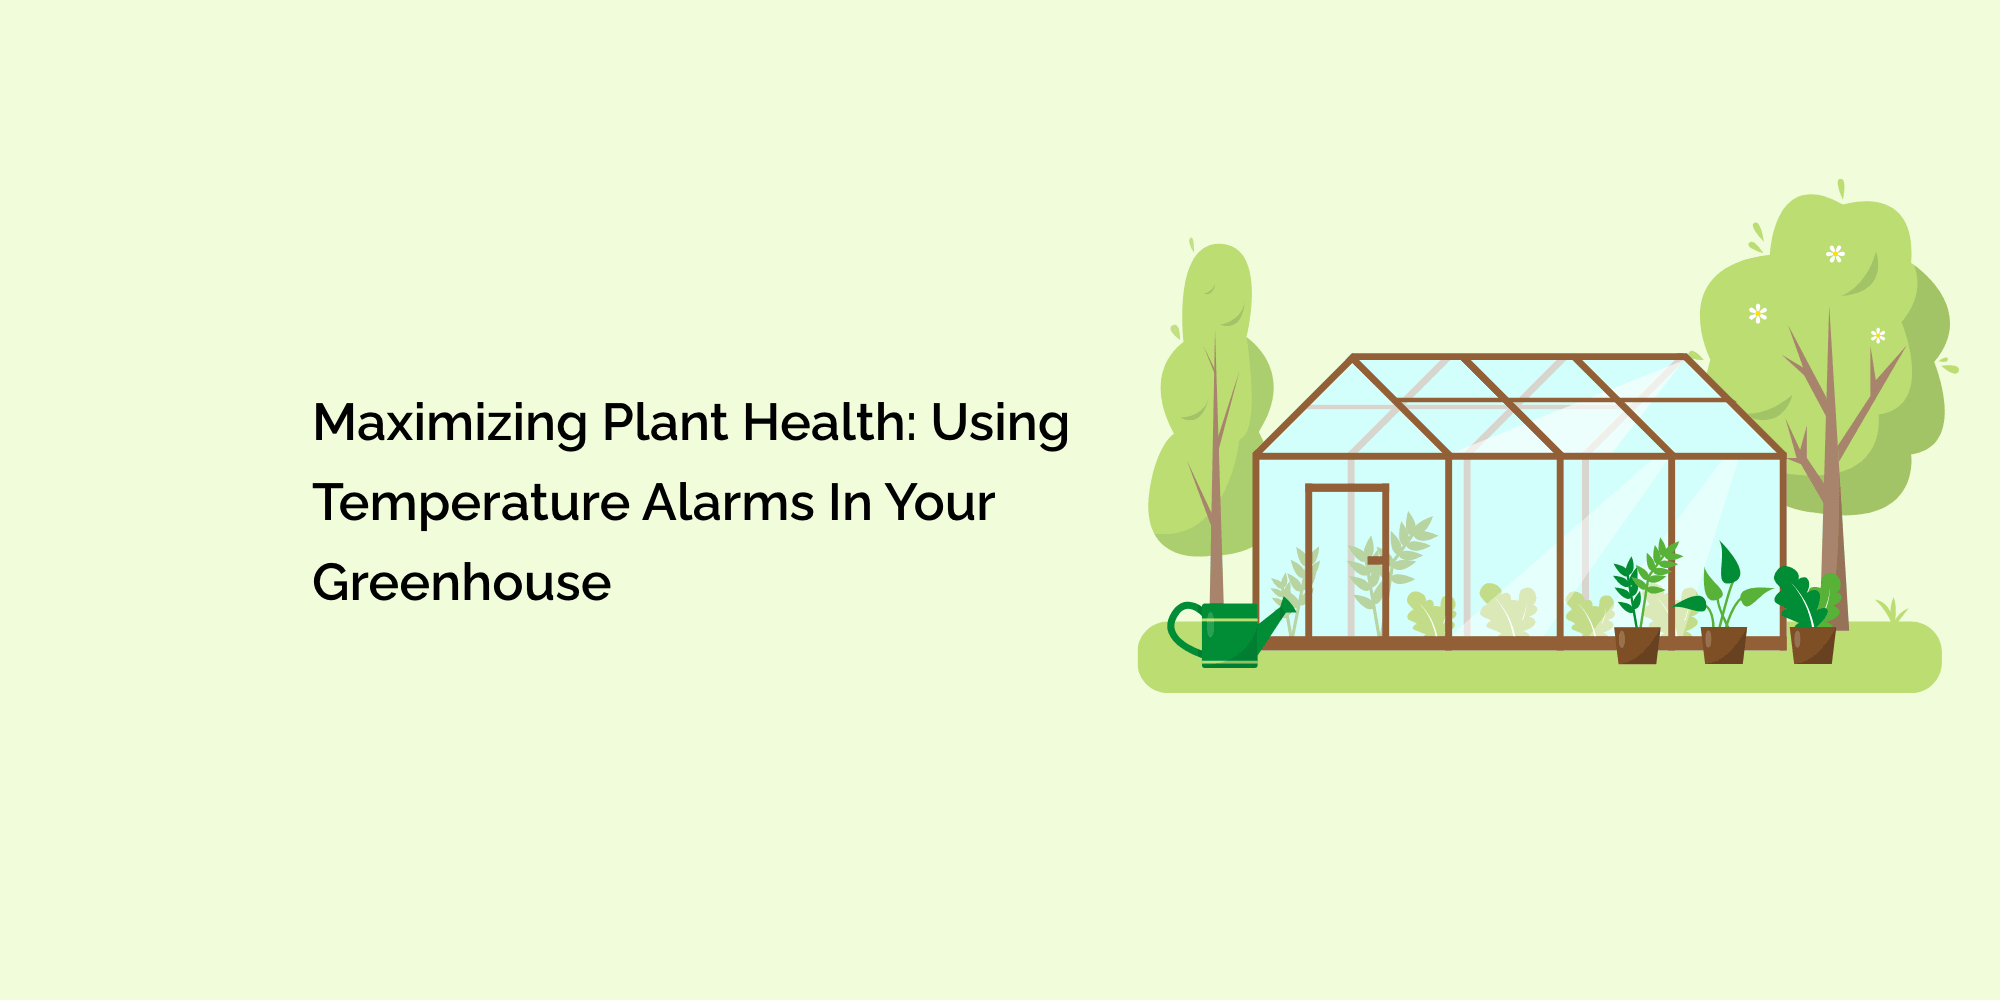 Maximizing Plant Health: Using Temperature Alarms in Your Greenhouse